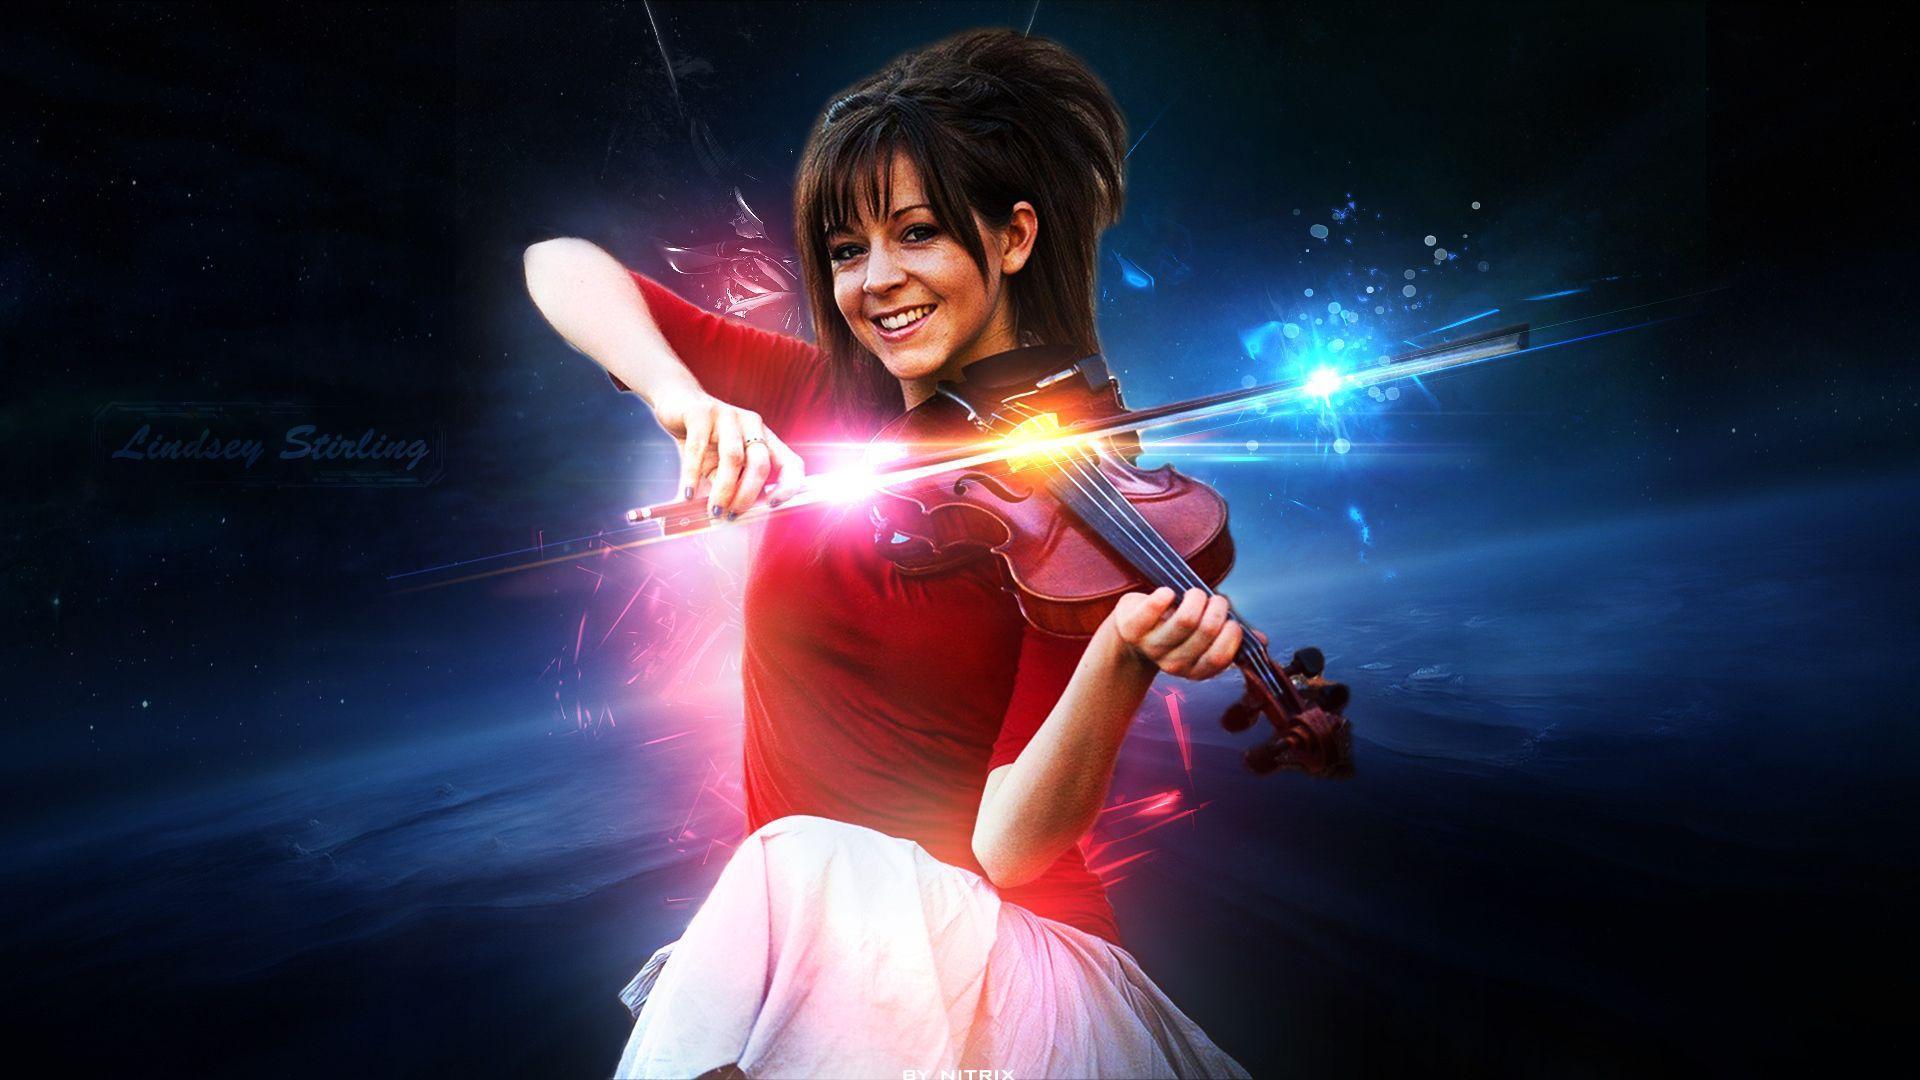 Lindsey Stirling Wallpaper Image Photo Picture Background